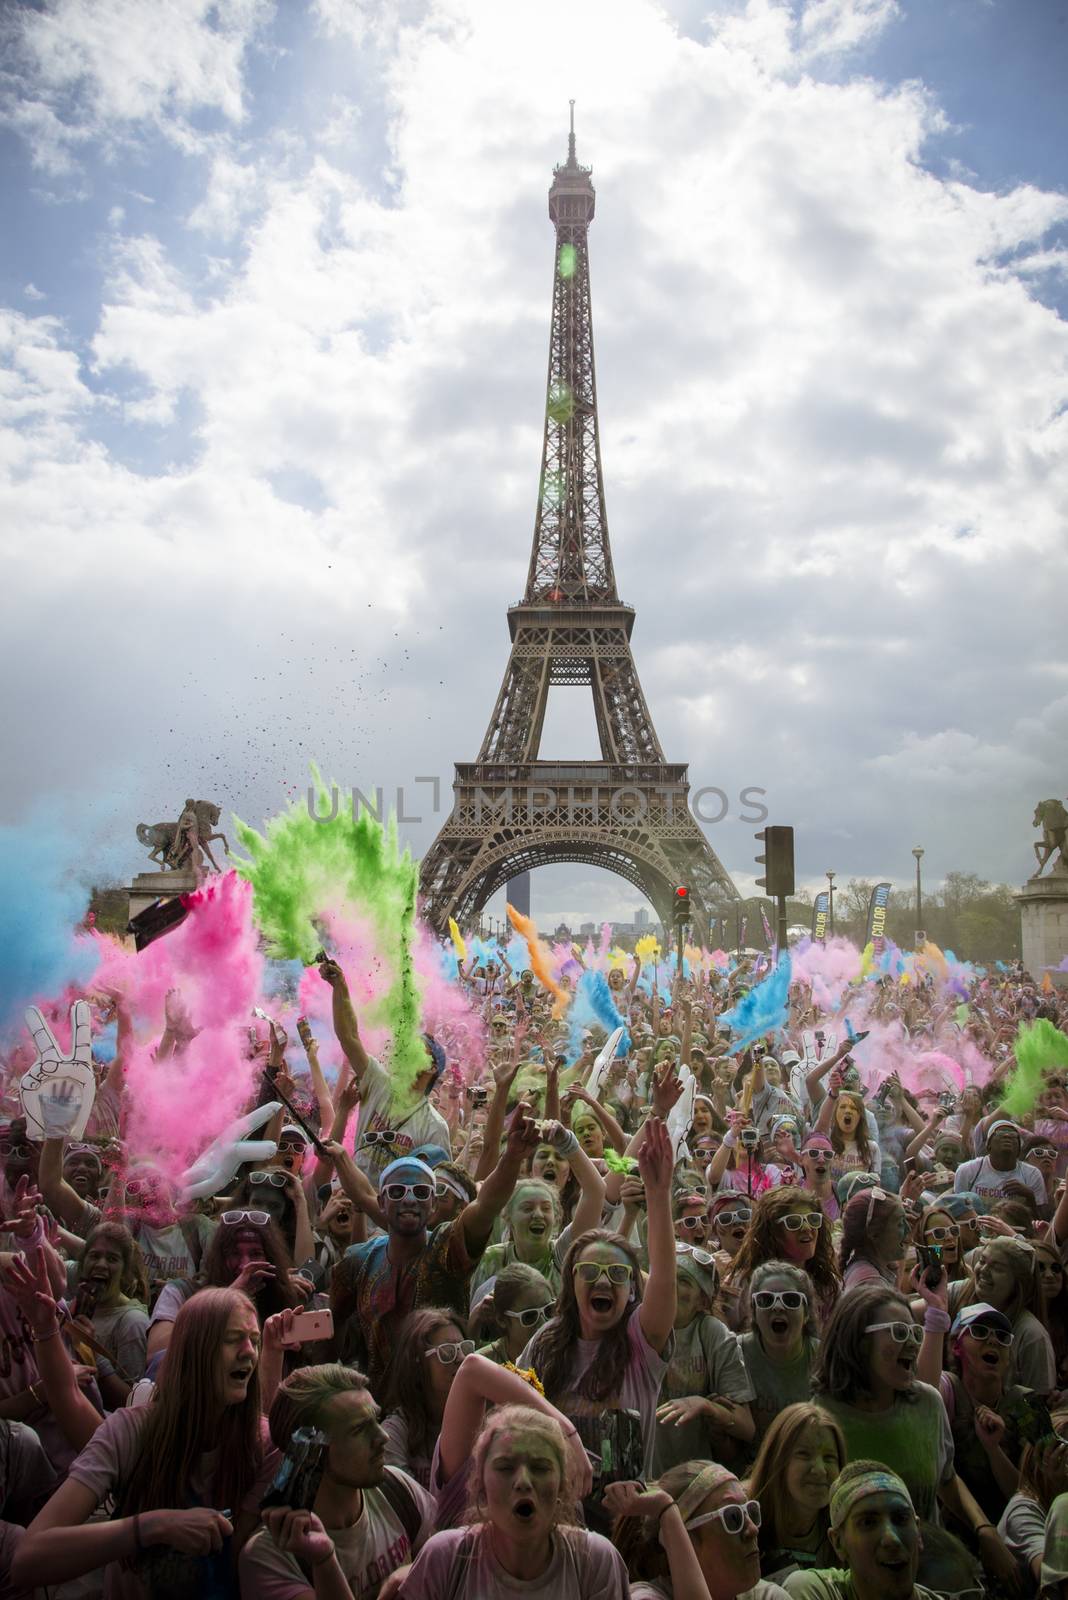 France: Over 30,000 participants attends a concert at the end of the Color Run by Sephora in Paris on April 17, 2016.